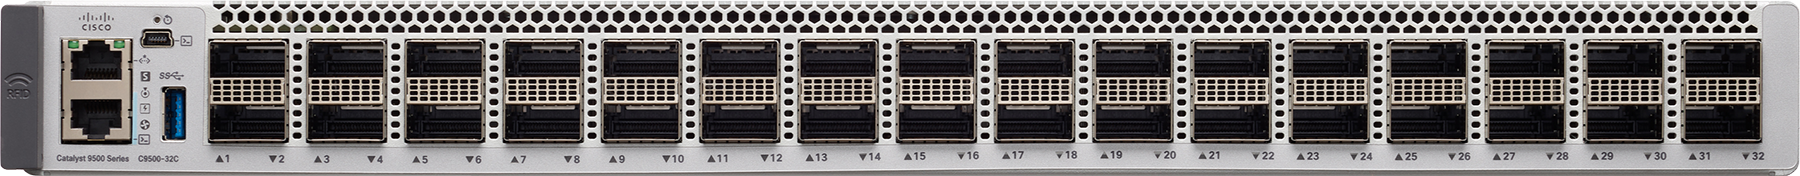 C9500-32QC: Cisco Catalyst 9500 Series high-performance switch with 32x 40 or 16x100 Gigabit Ethernet